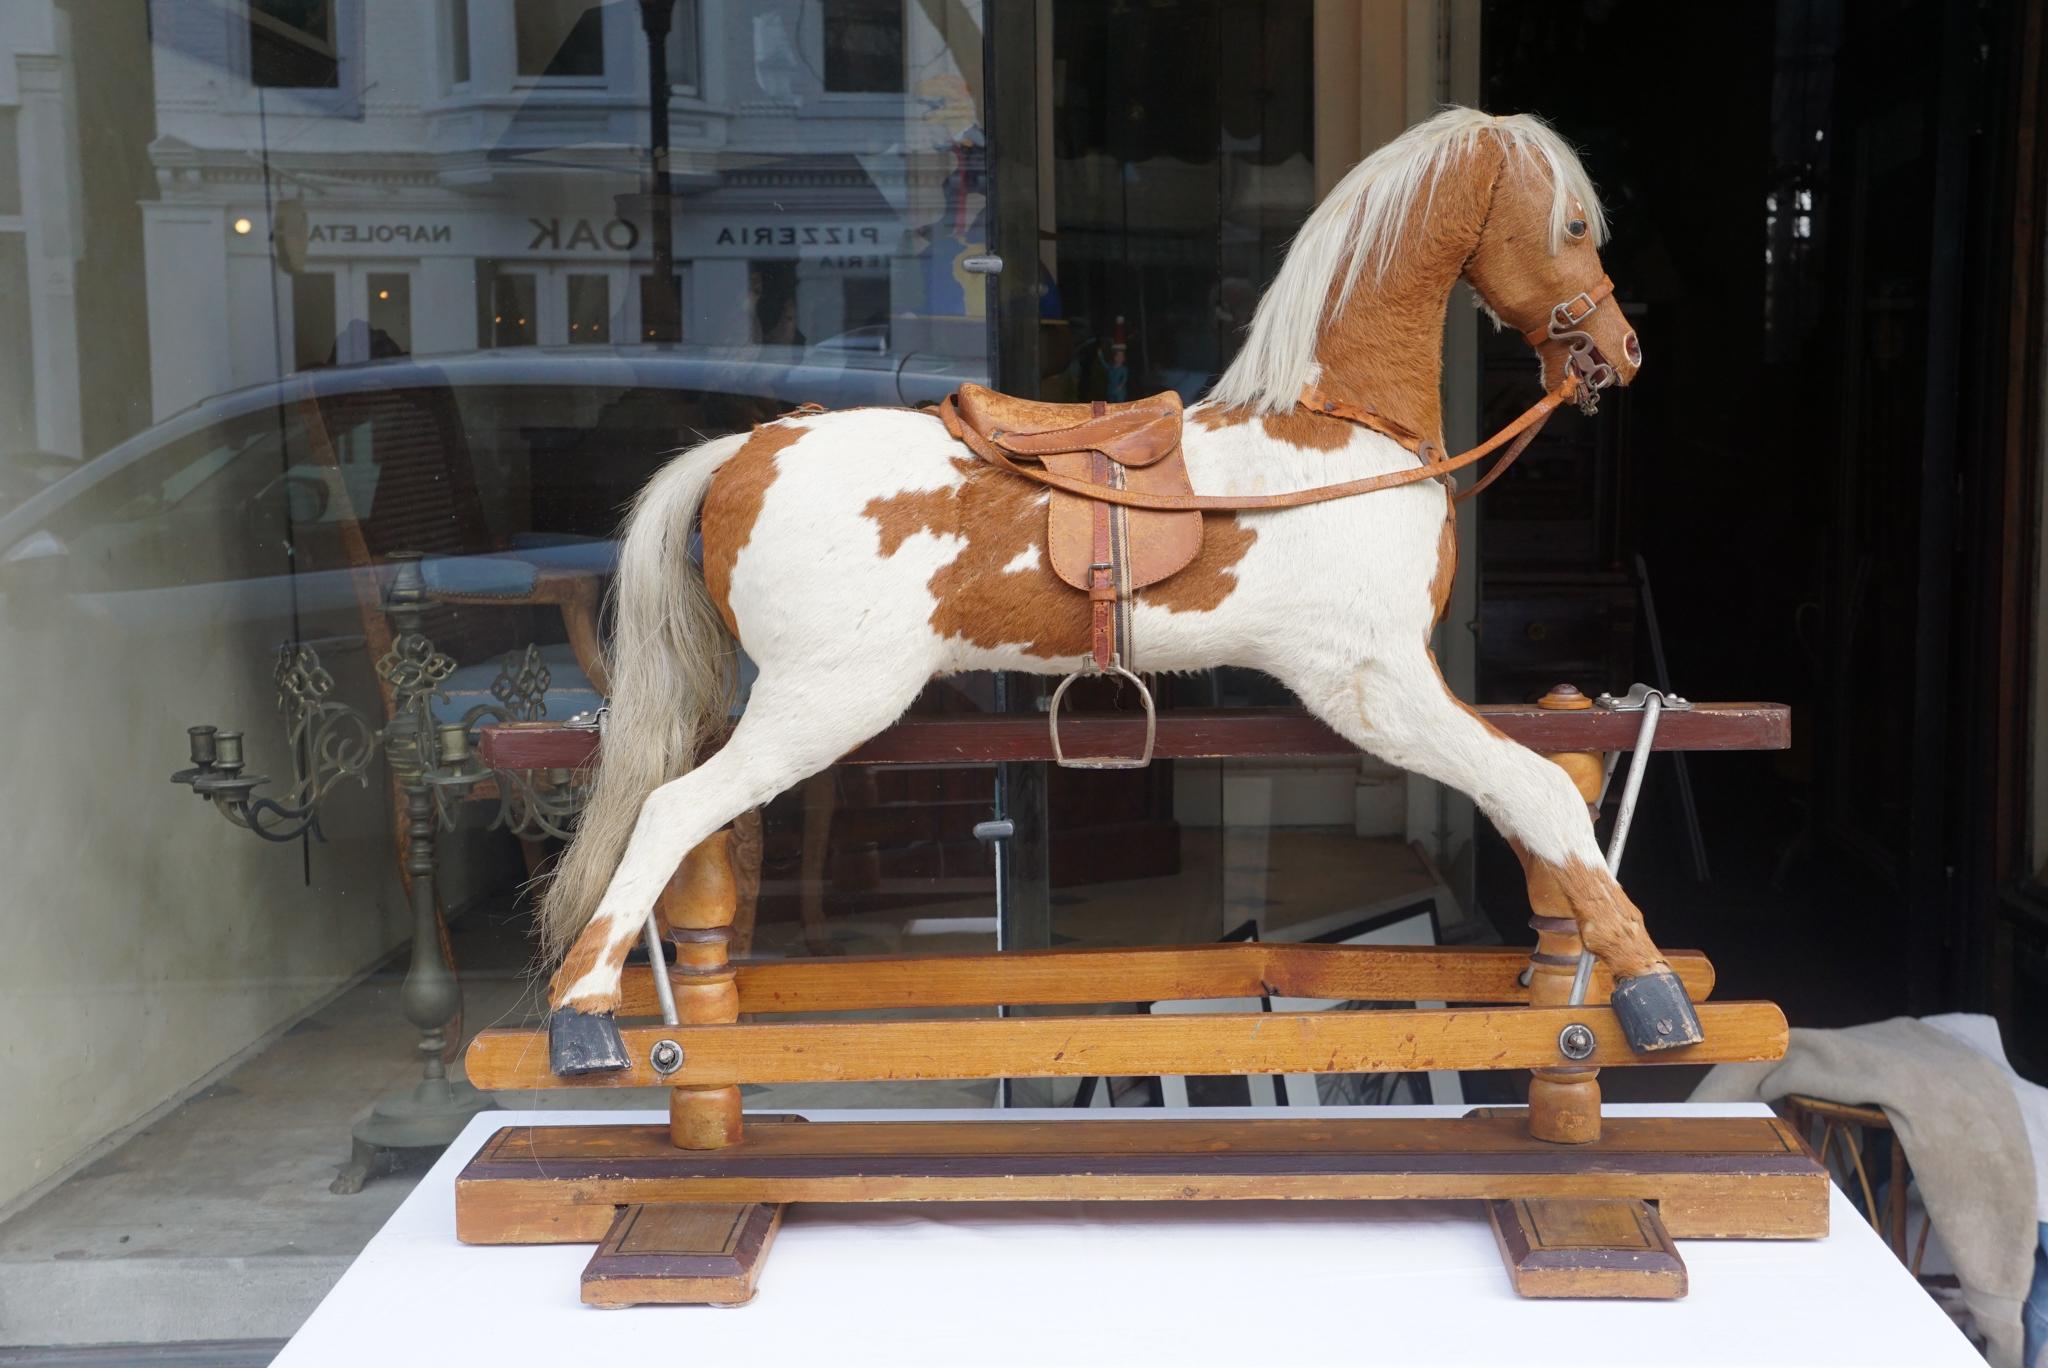 This rare survivor of the F. A. O. Schwarz Toy Bazaar comes from an early period in the firm's history. The labeled horse (see photo 7) was produced before 1889. The company was founded in 1862 by Fredric August Otto Schwarz in conjunction with his